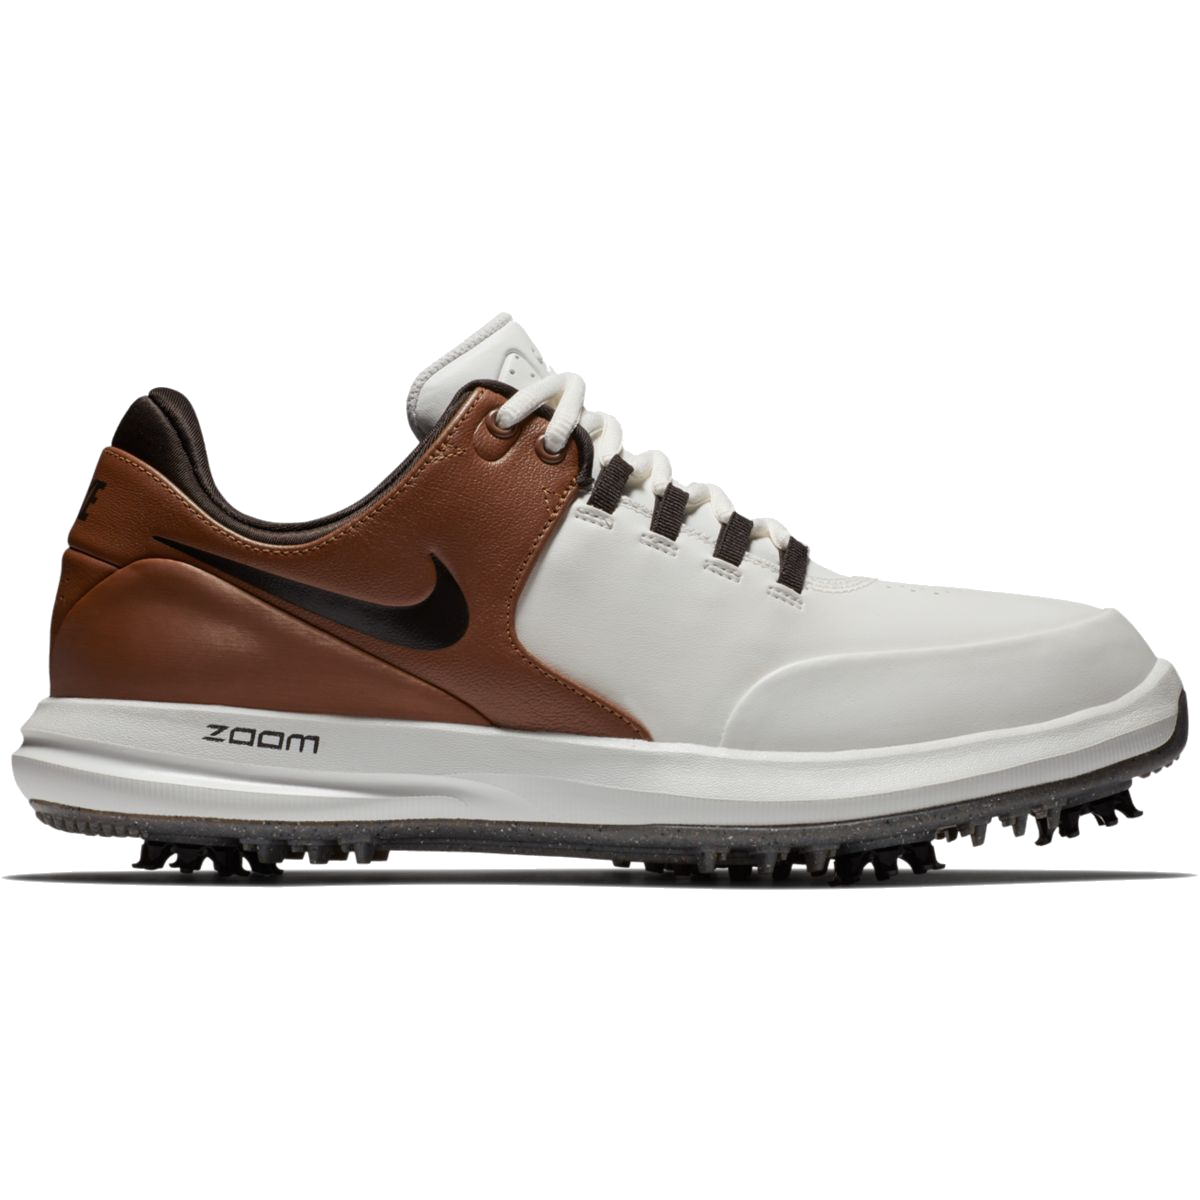 nike air zoom accurate golf shoes review